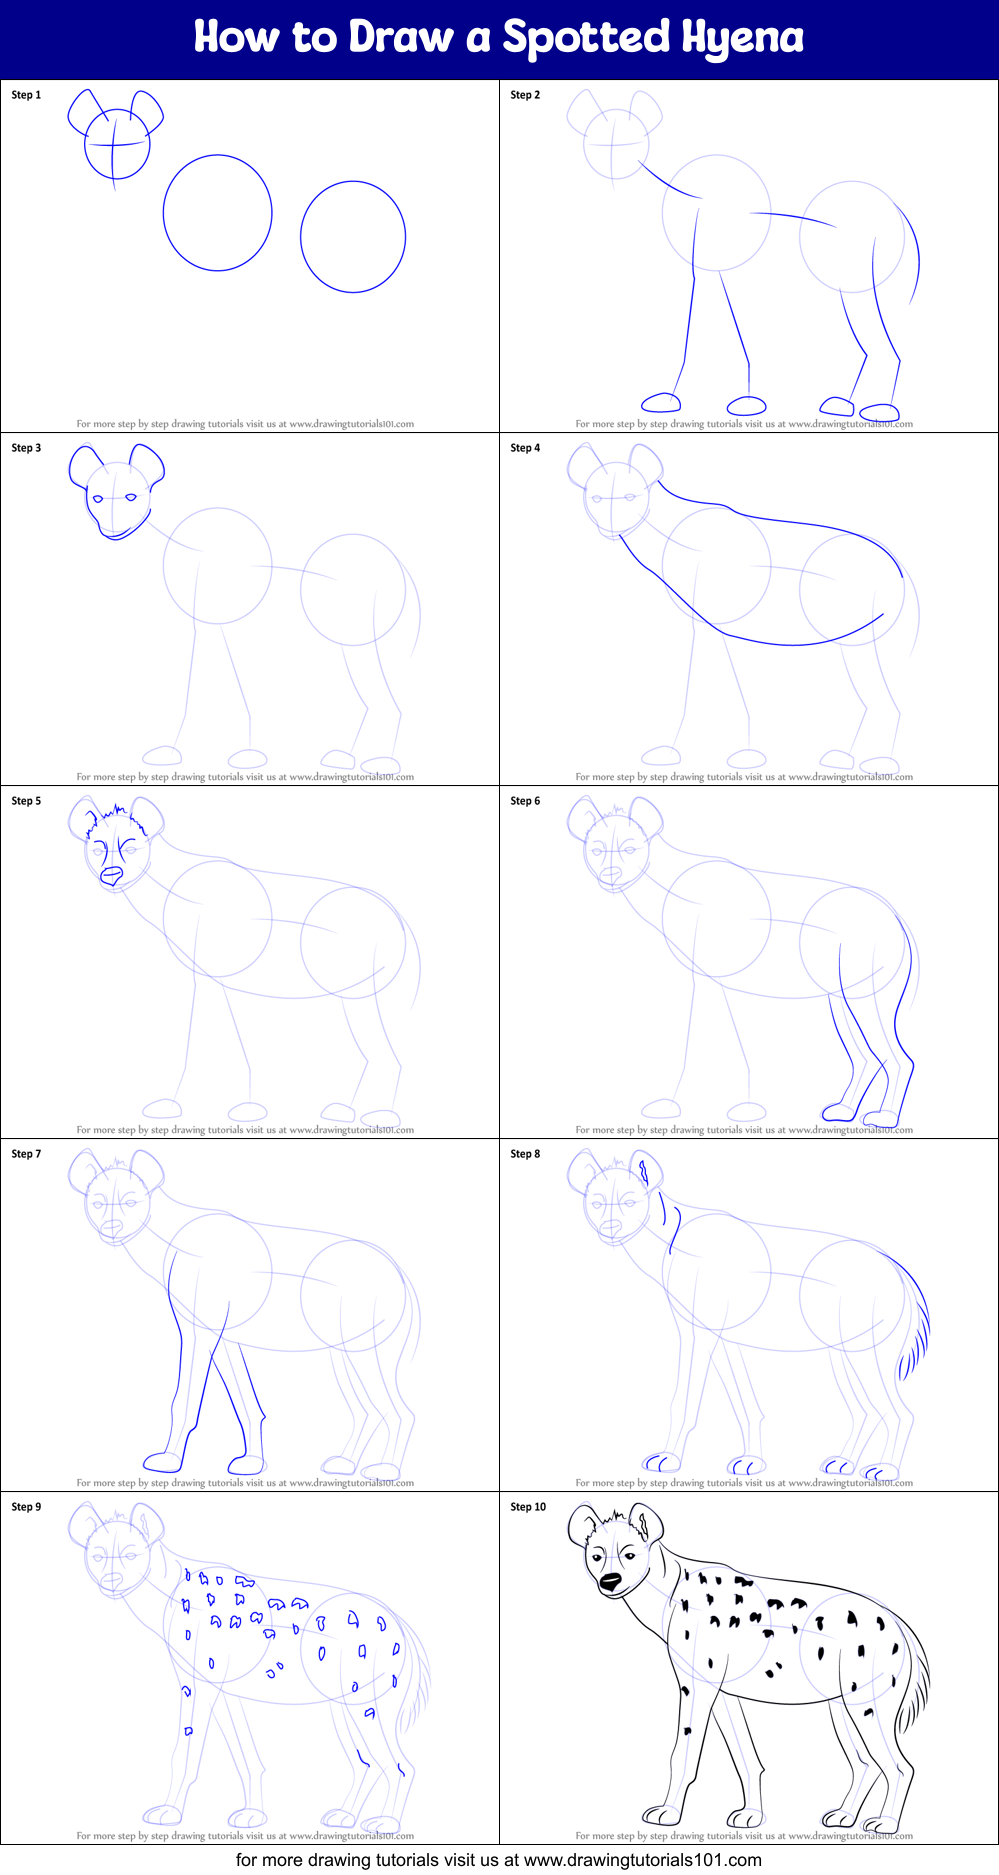 How to Draw a Spotted Hyena printable step by step drawing sheet